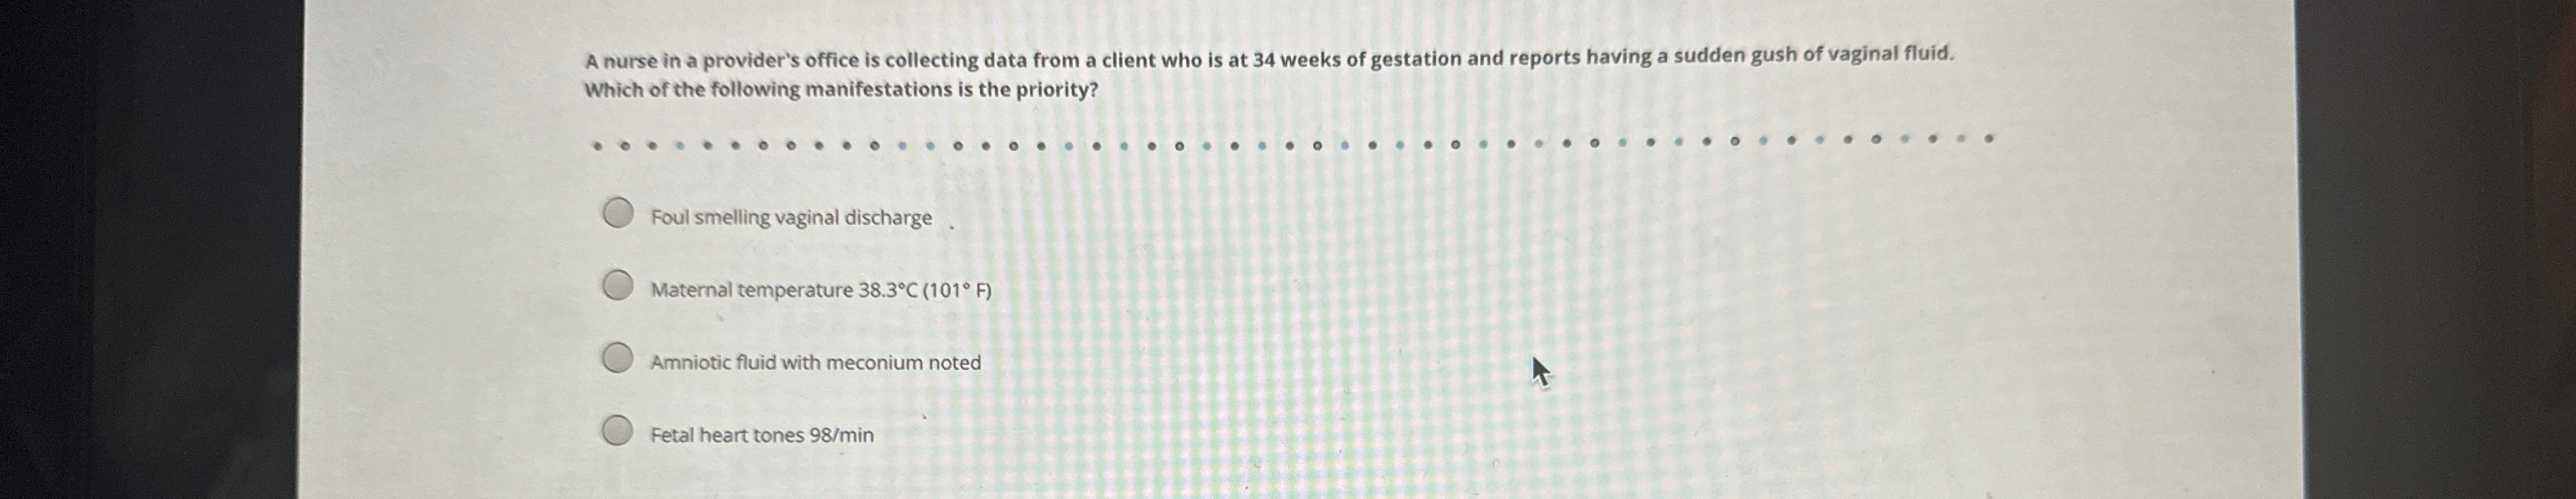 Solved A nurse in a provider's office is collecting data